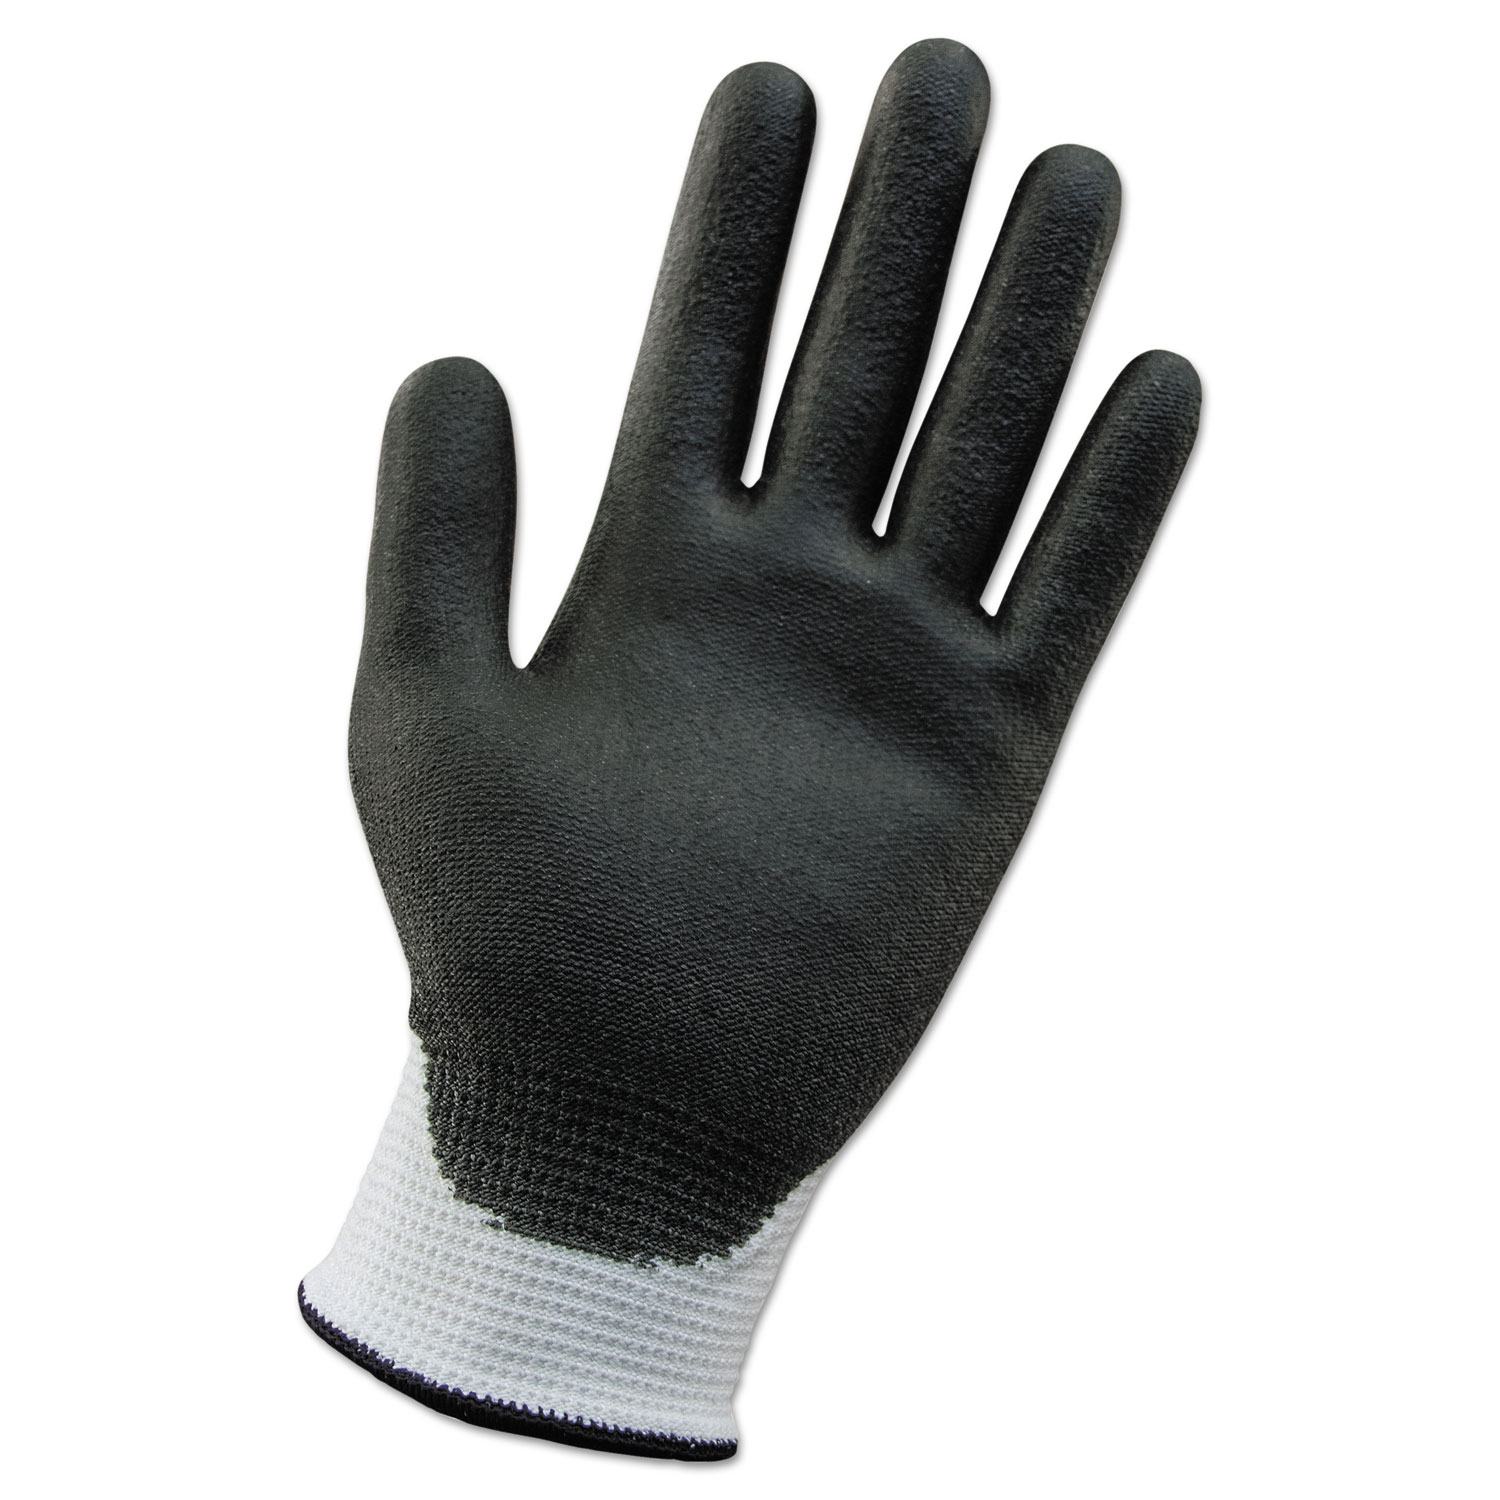  KleenGuard 38689 G60 ANSI Level 2 Cut-Resistant Gloves, White/Blk, 220 mm Length, Small, 12 Pairs (KCC38689) 